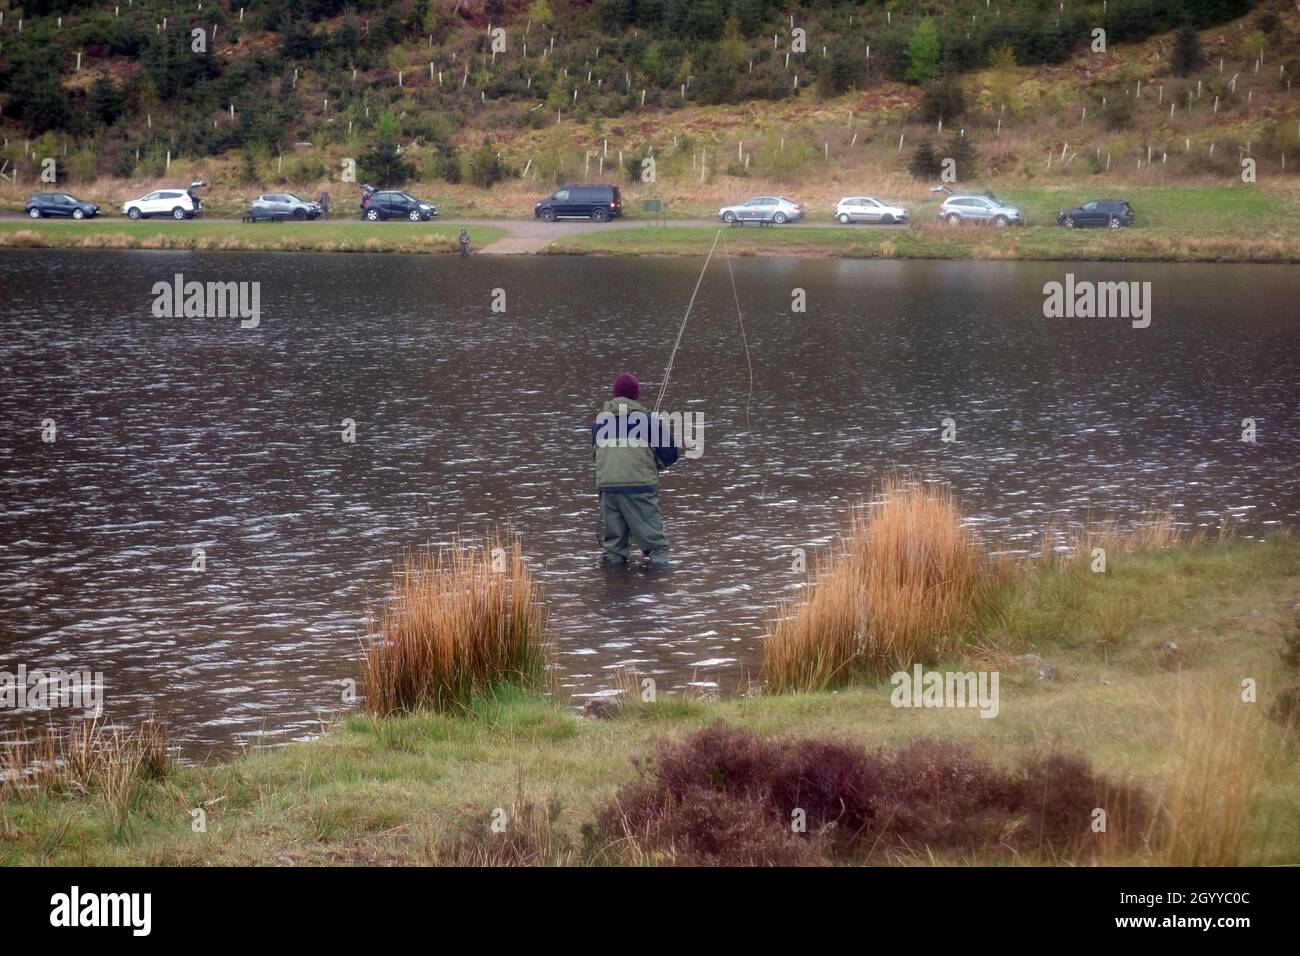 Lone Angler from Cockermouth Angling Association Fly Fishing on Cogra Moss Reservoir in the Lake District National Park, Cumbria, England, UK Stock Photo